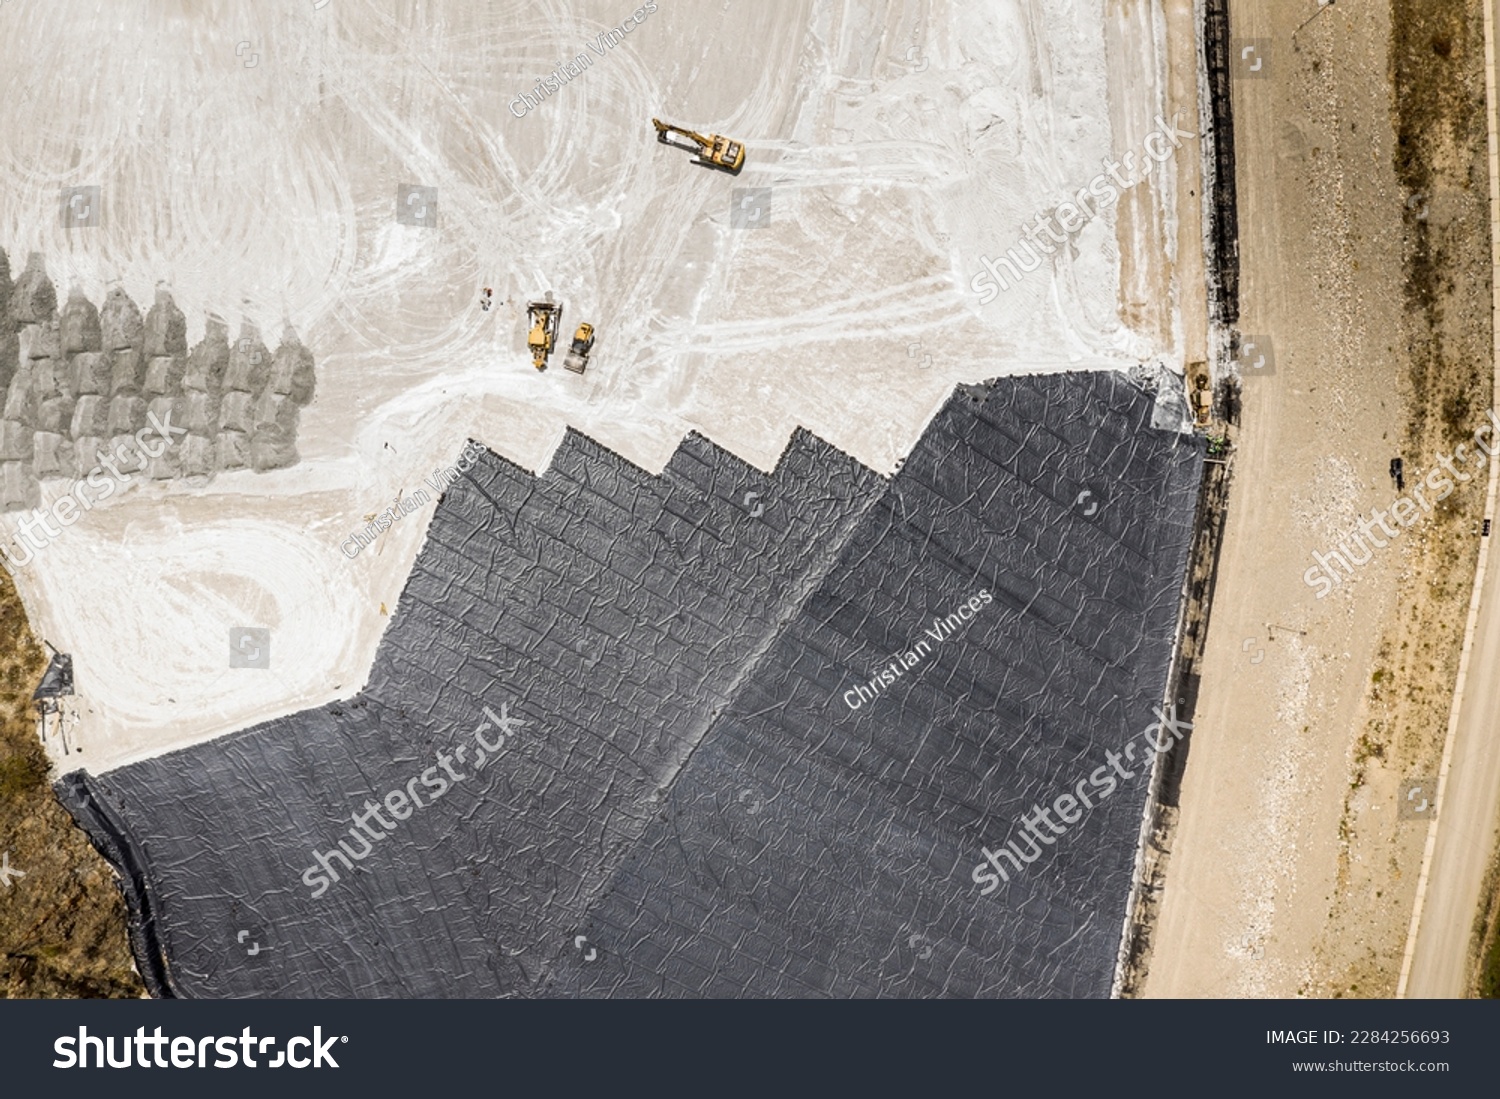 Aerial view of remediation work on a terrain with mining waste fillings, where working machinery and high-density geomembrane cover can be seen. #2284256693